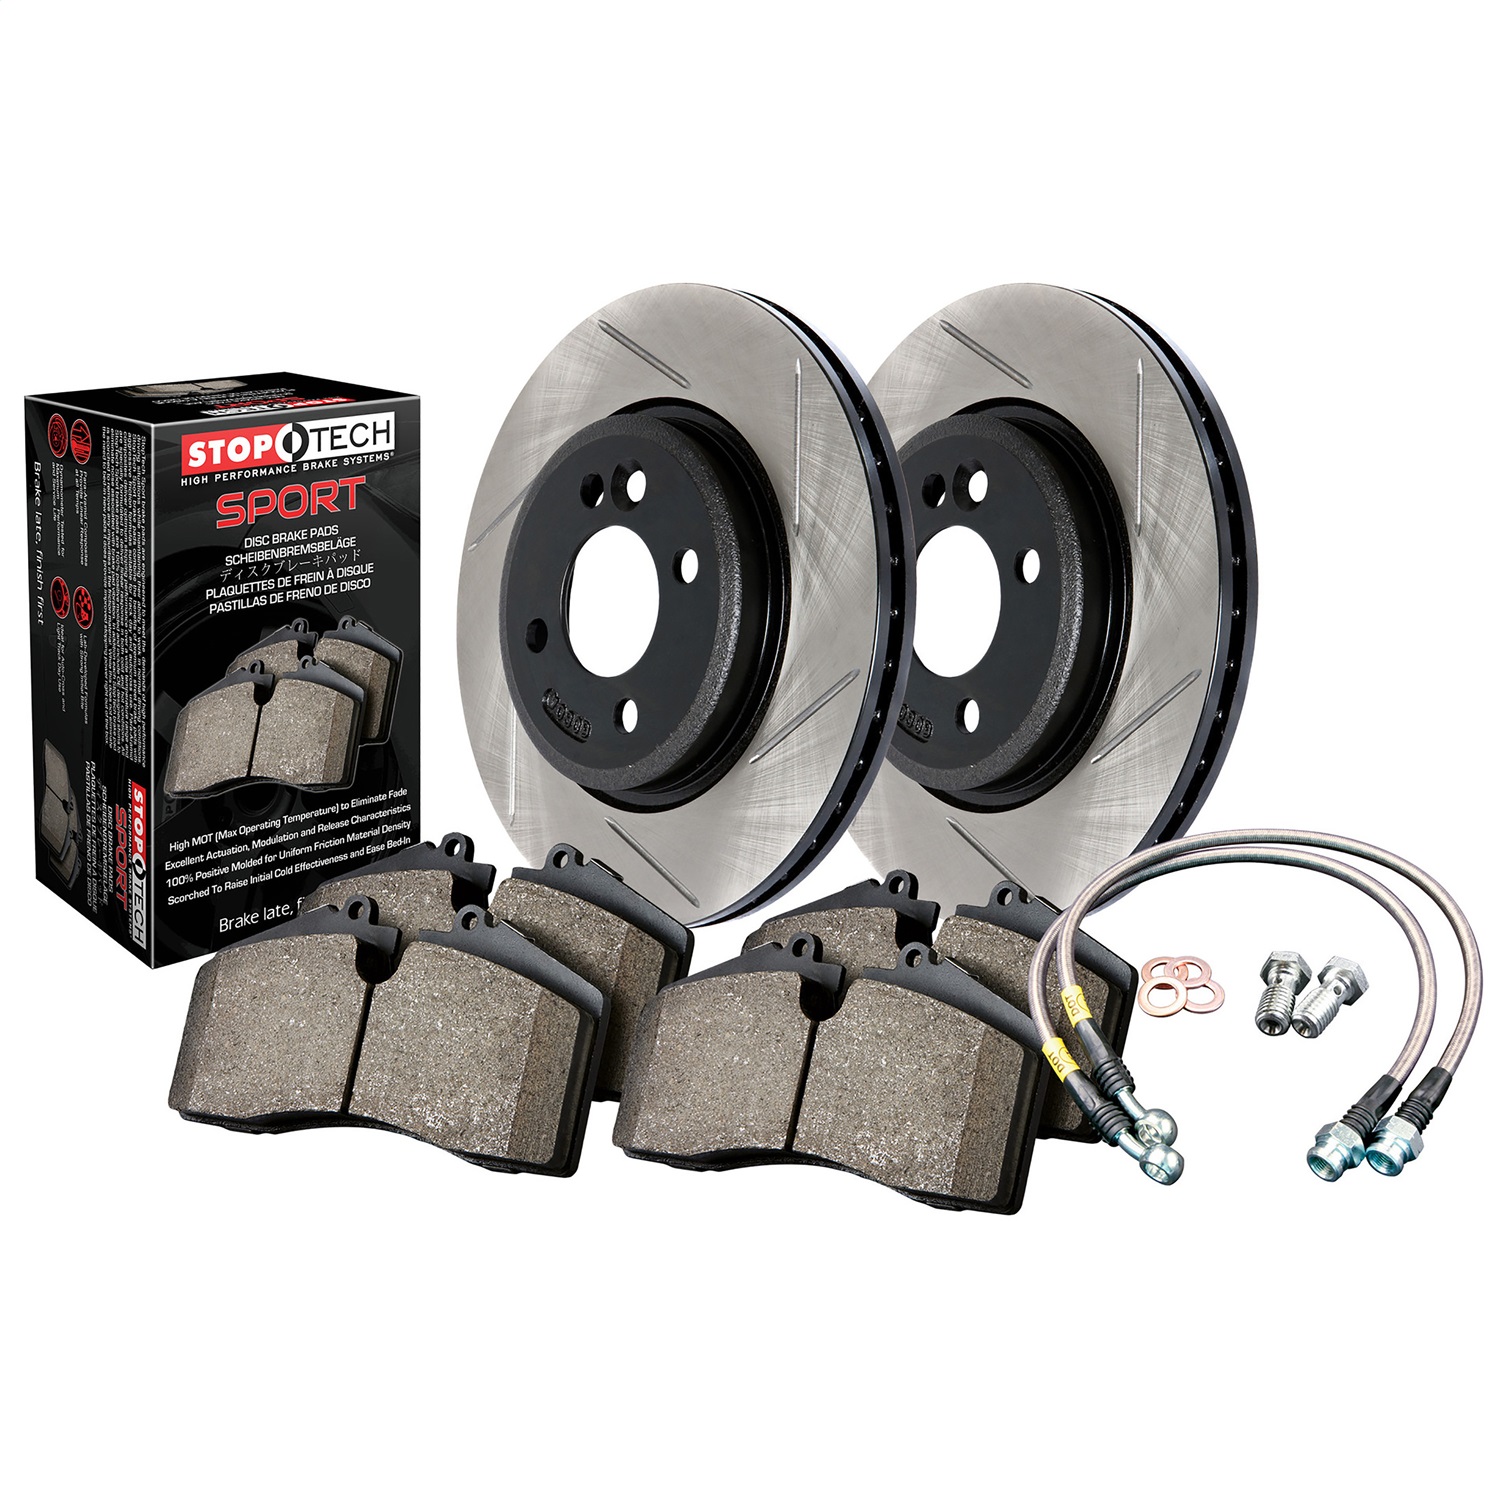 StopTech 977.33036R Sport Disc Brake Kit w/Slotted Rotors